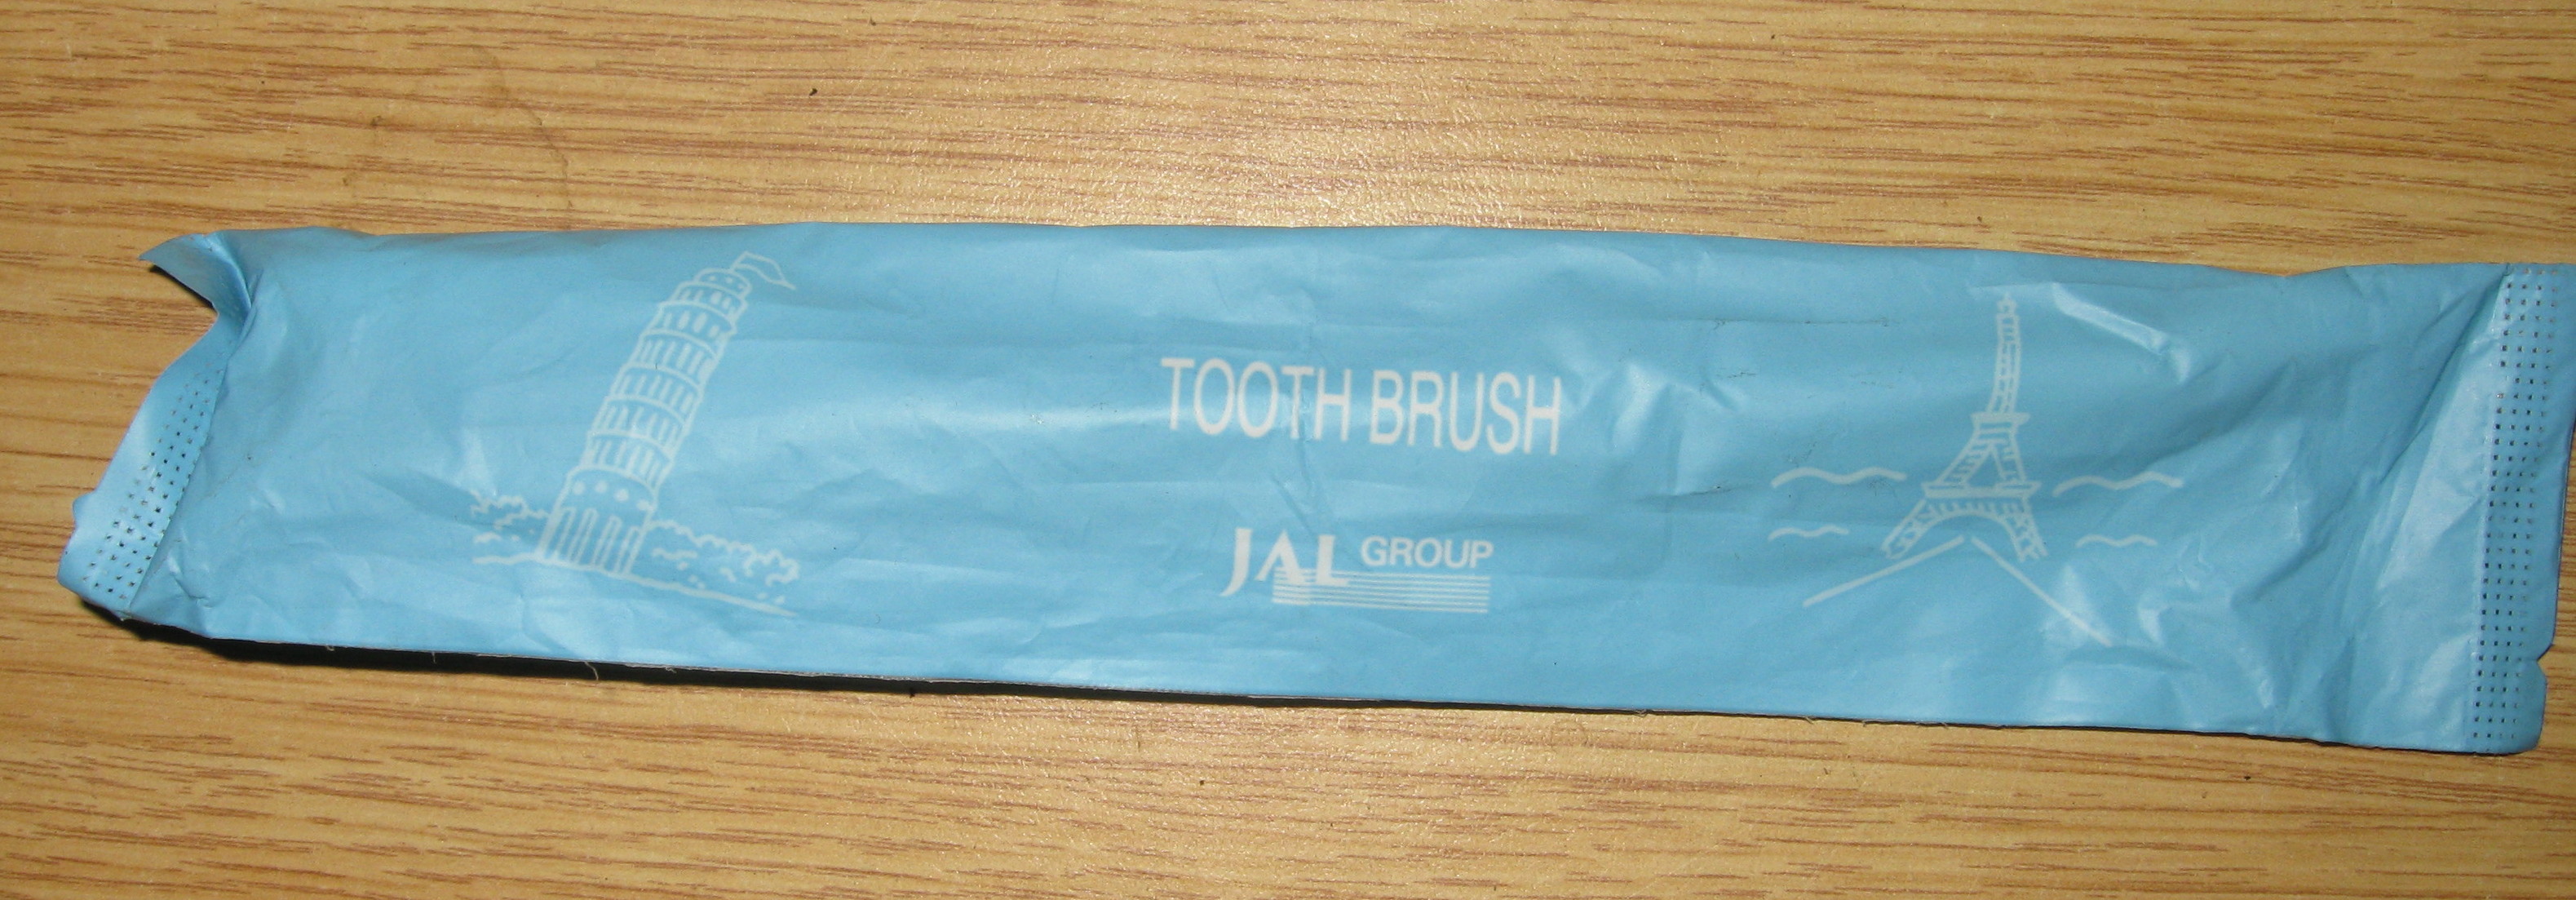 Japan Airlines Tooth brush and paste